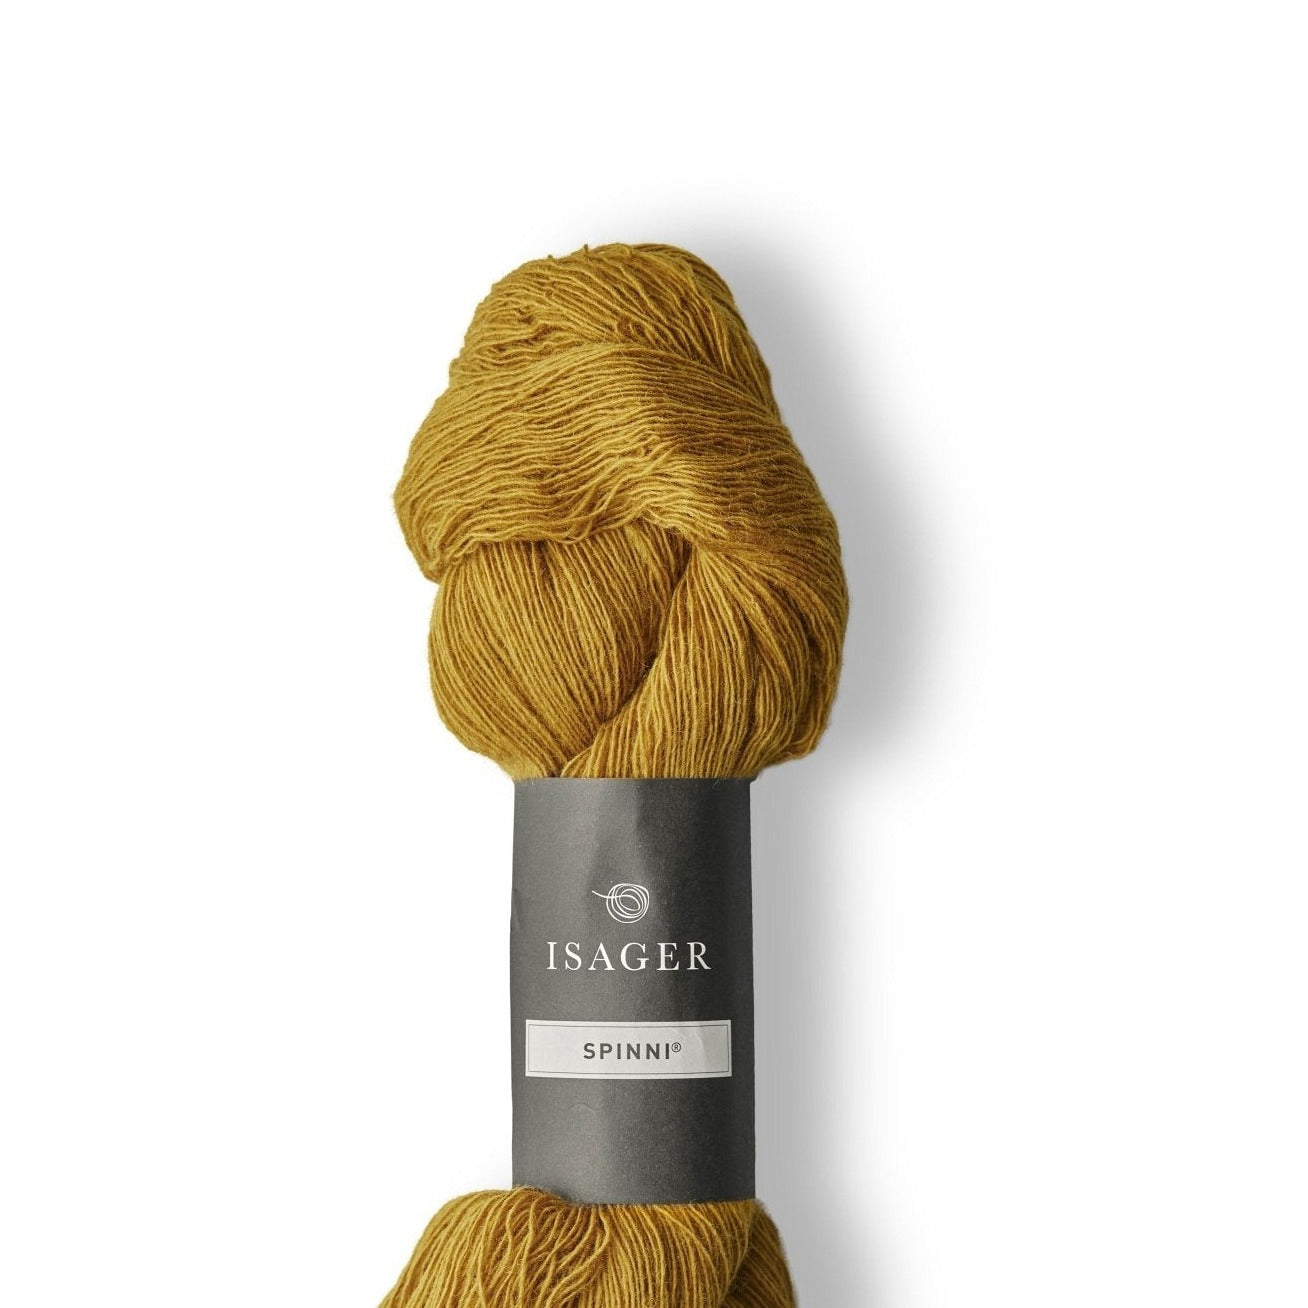 Isager Spinni - 3 - 2 Ply - Isager - The Little Yarn Store